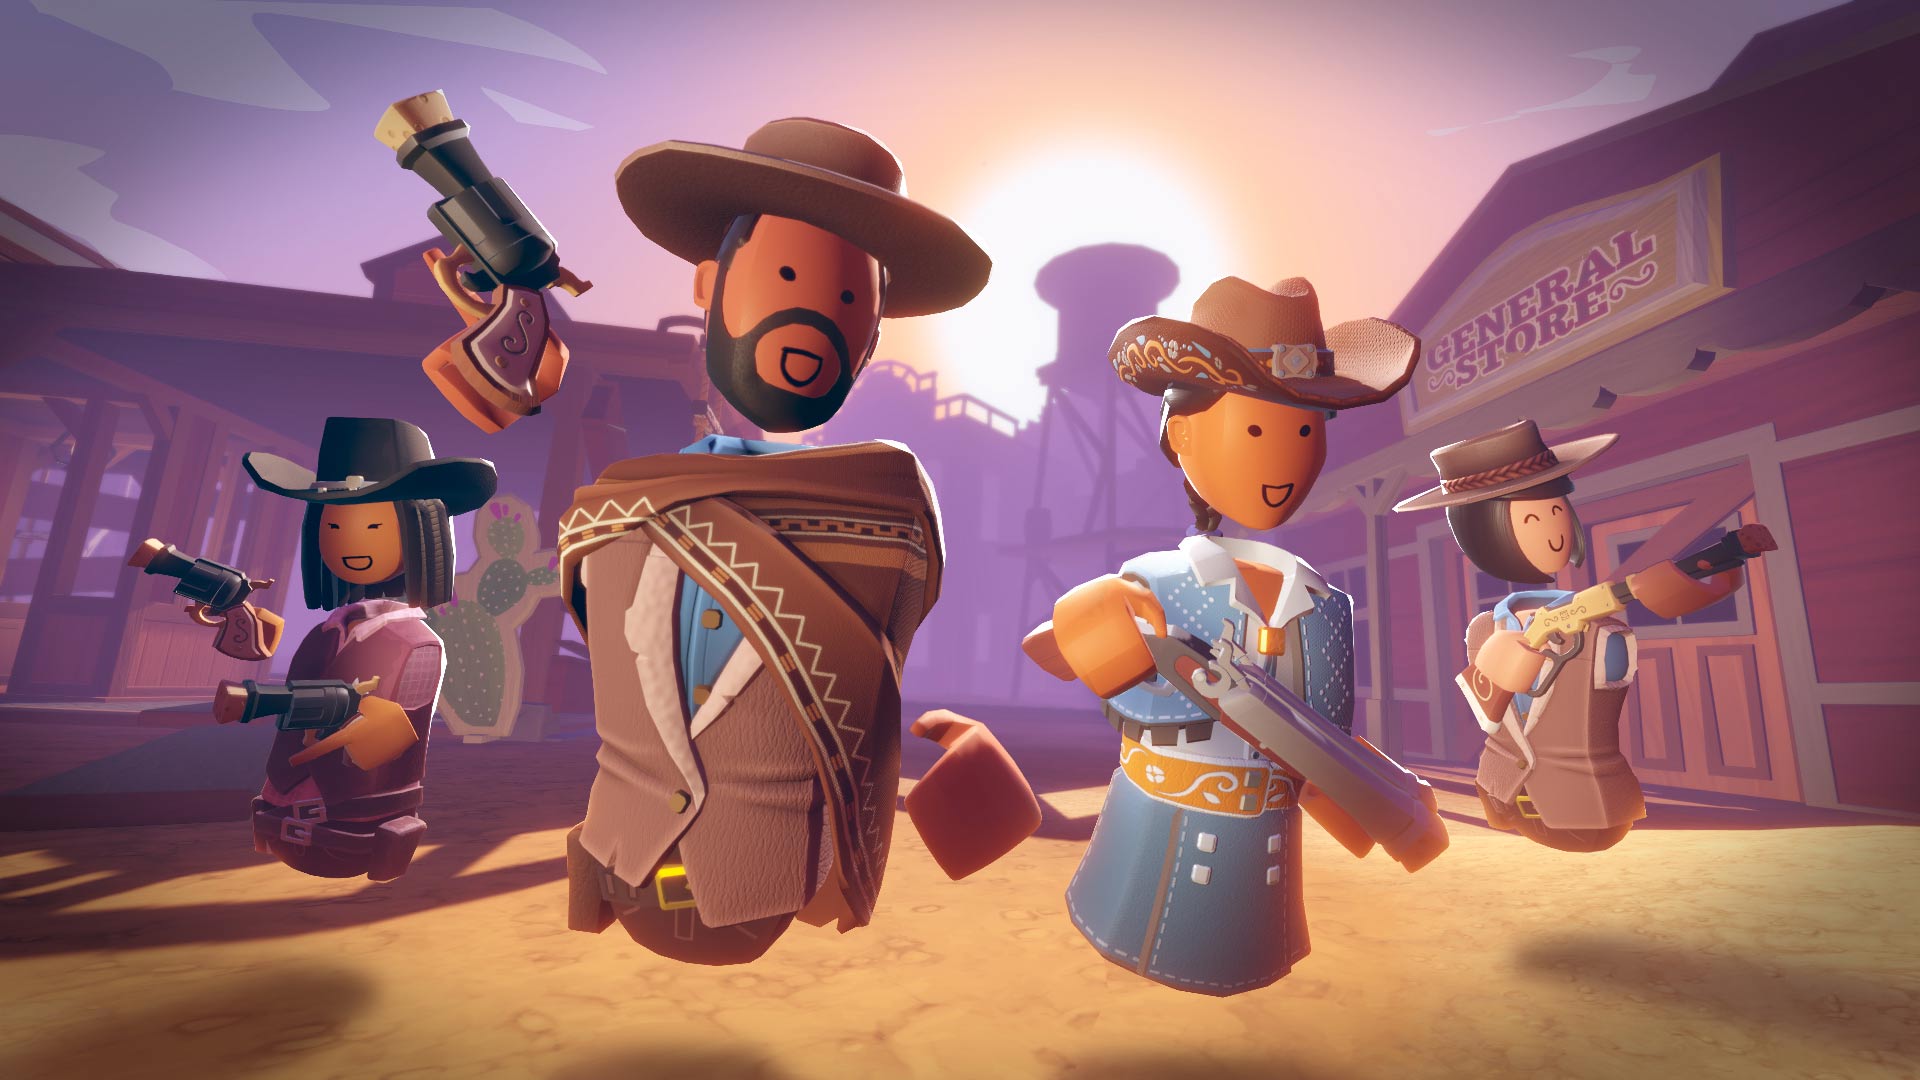 ‘Rec Room’ Launches Western-style Shooter Today with ‘Showdown’, Releases Weapon Maker Tools